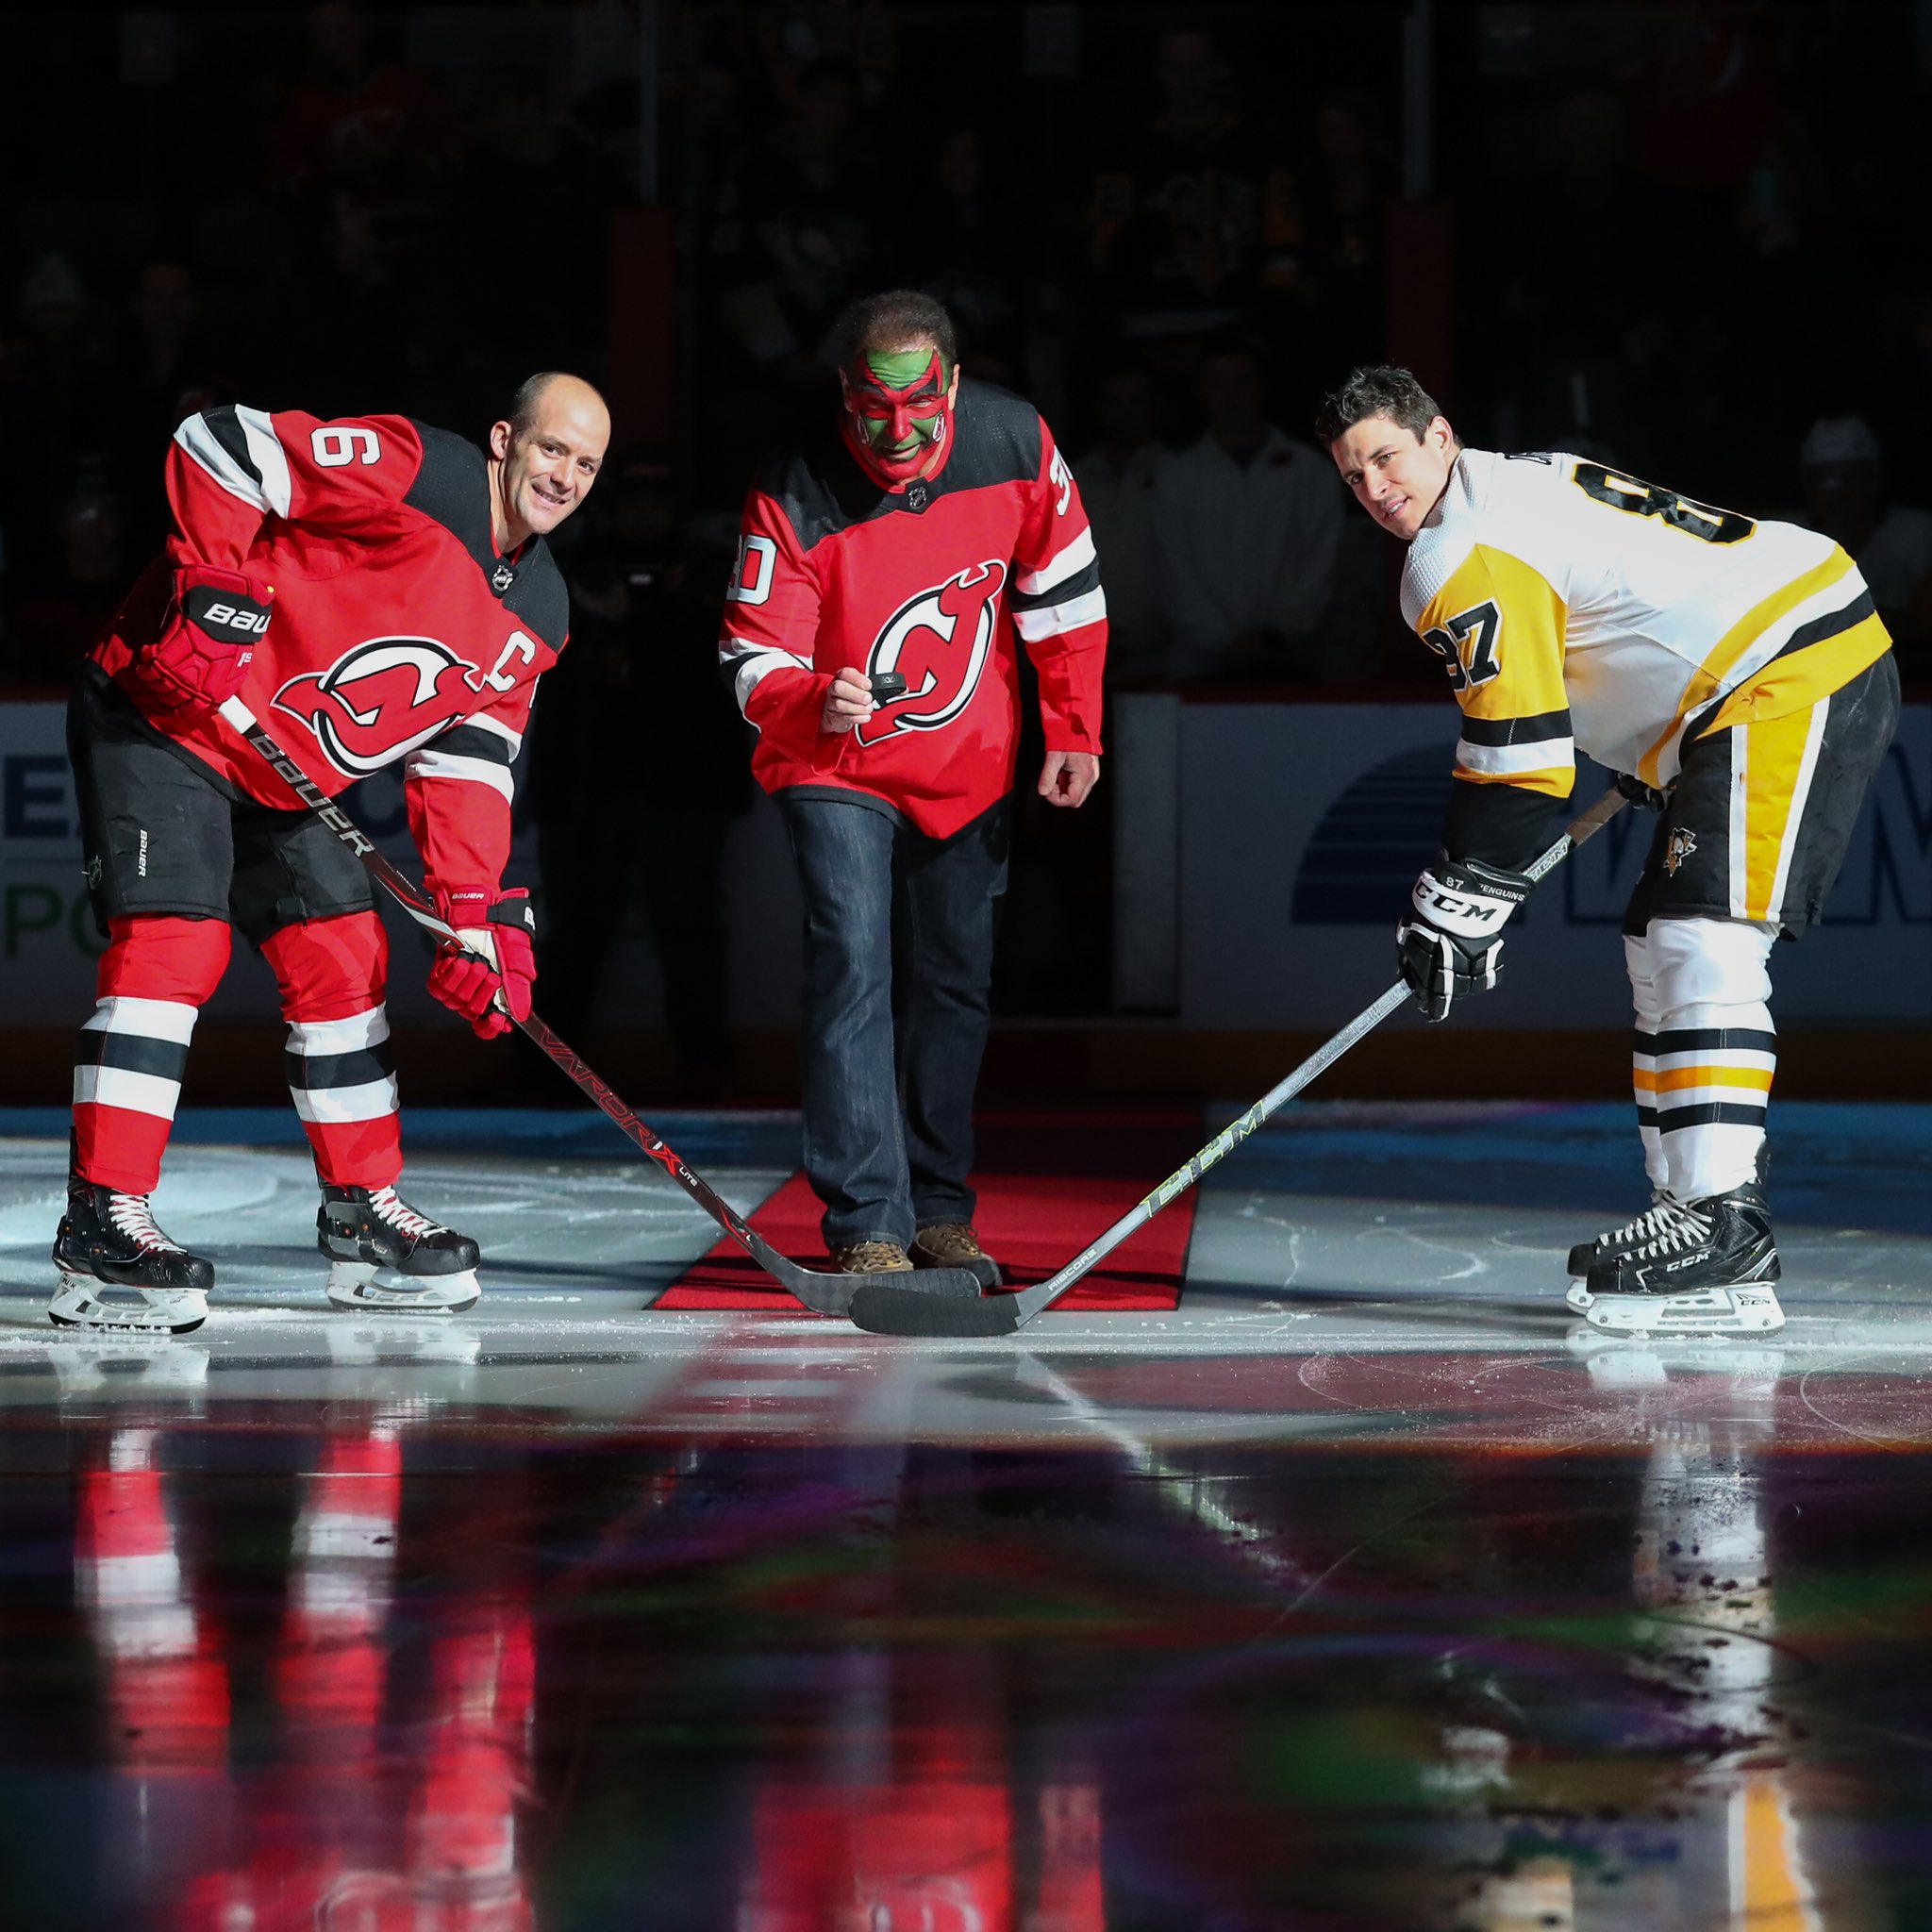 Seinfeld” actor Patrick Warburton shows up at New Jersey Devils game with  face painted – The Denver Post